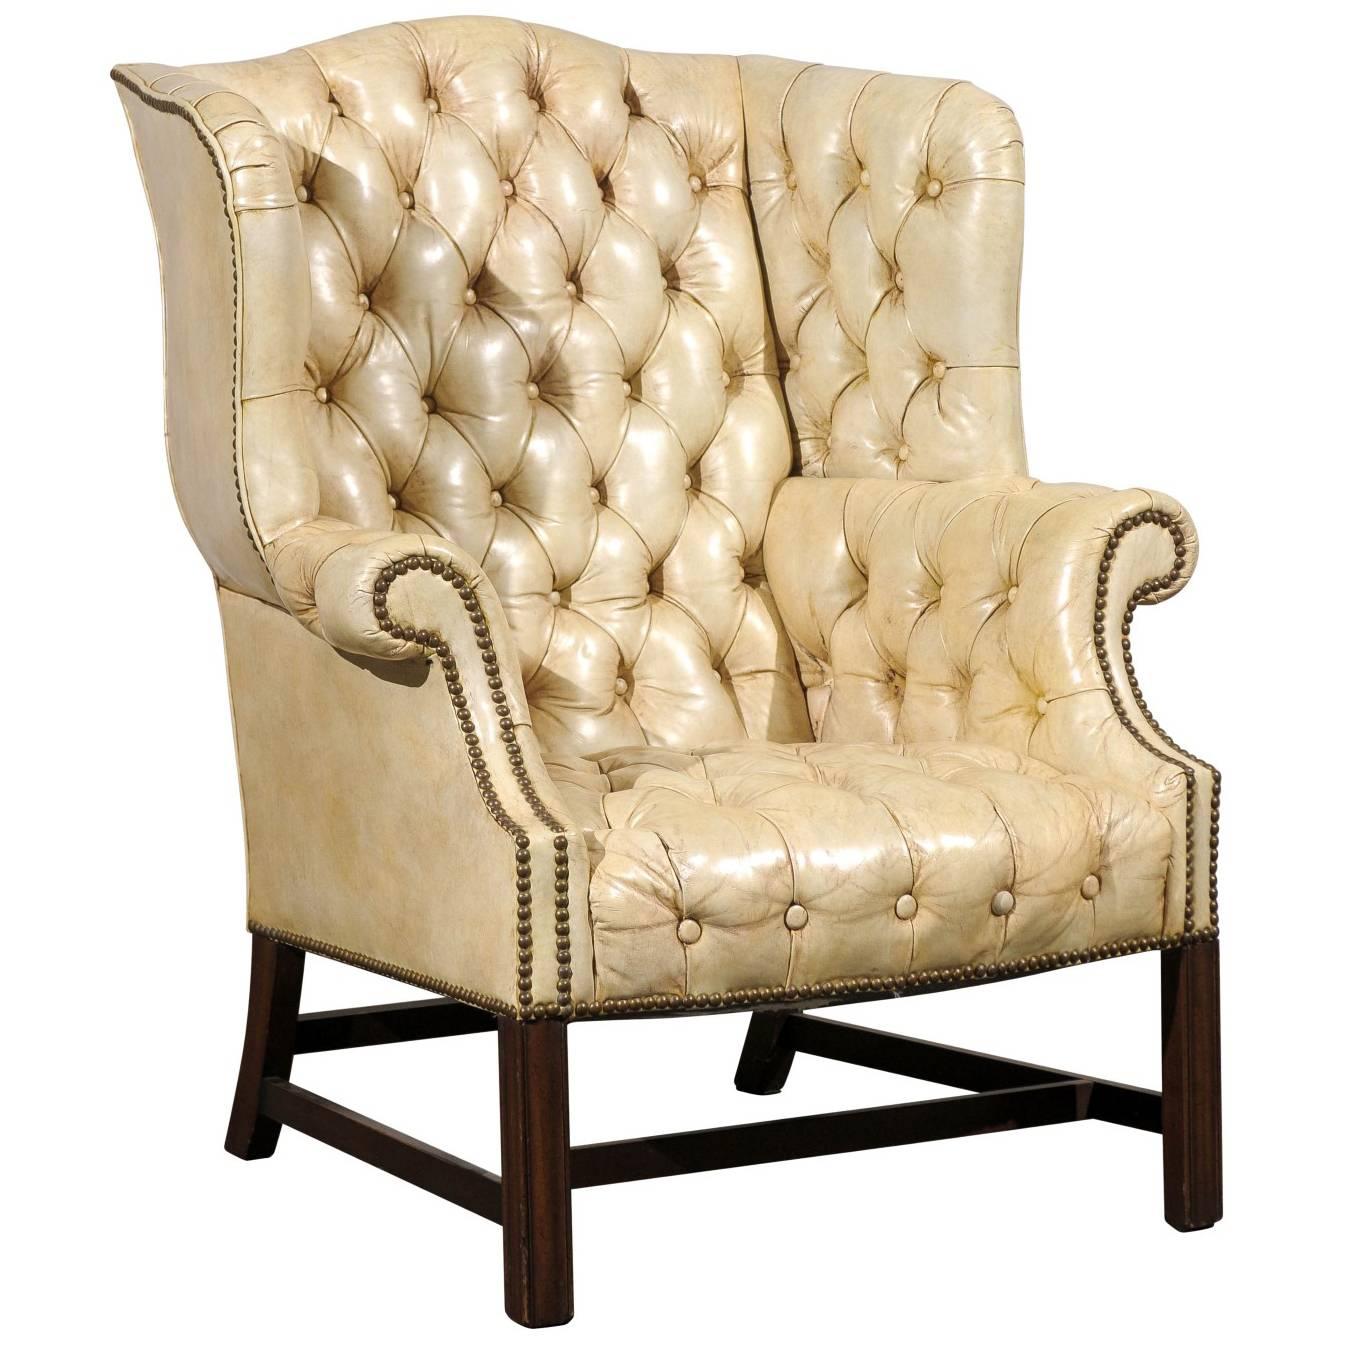 20th Century Tufted Georgian Style Wing Chair, White Leather